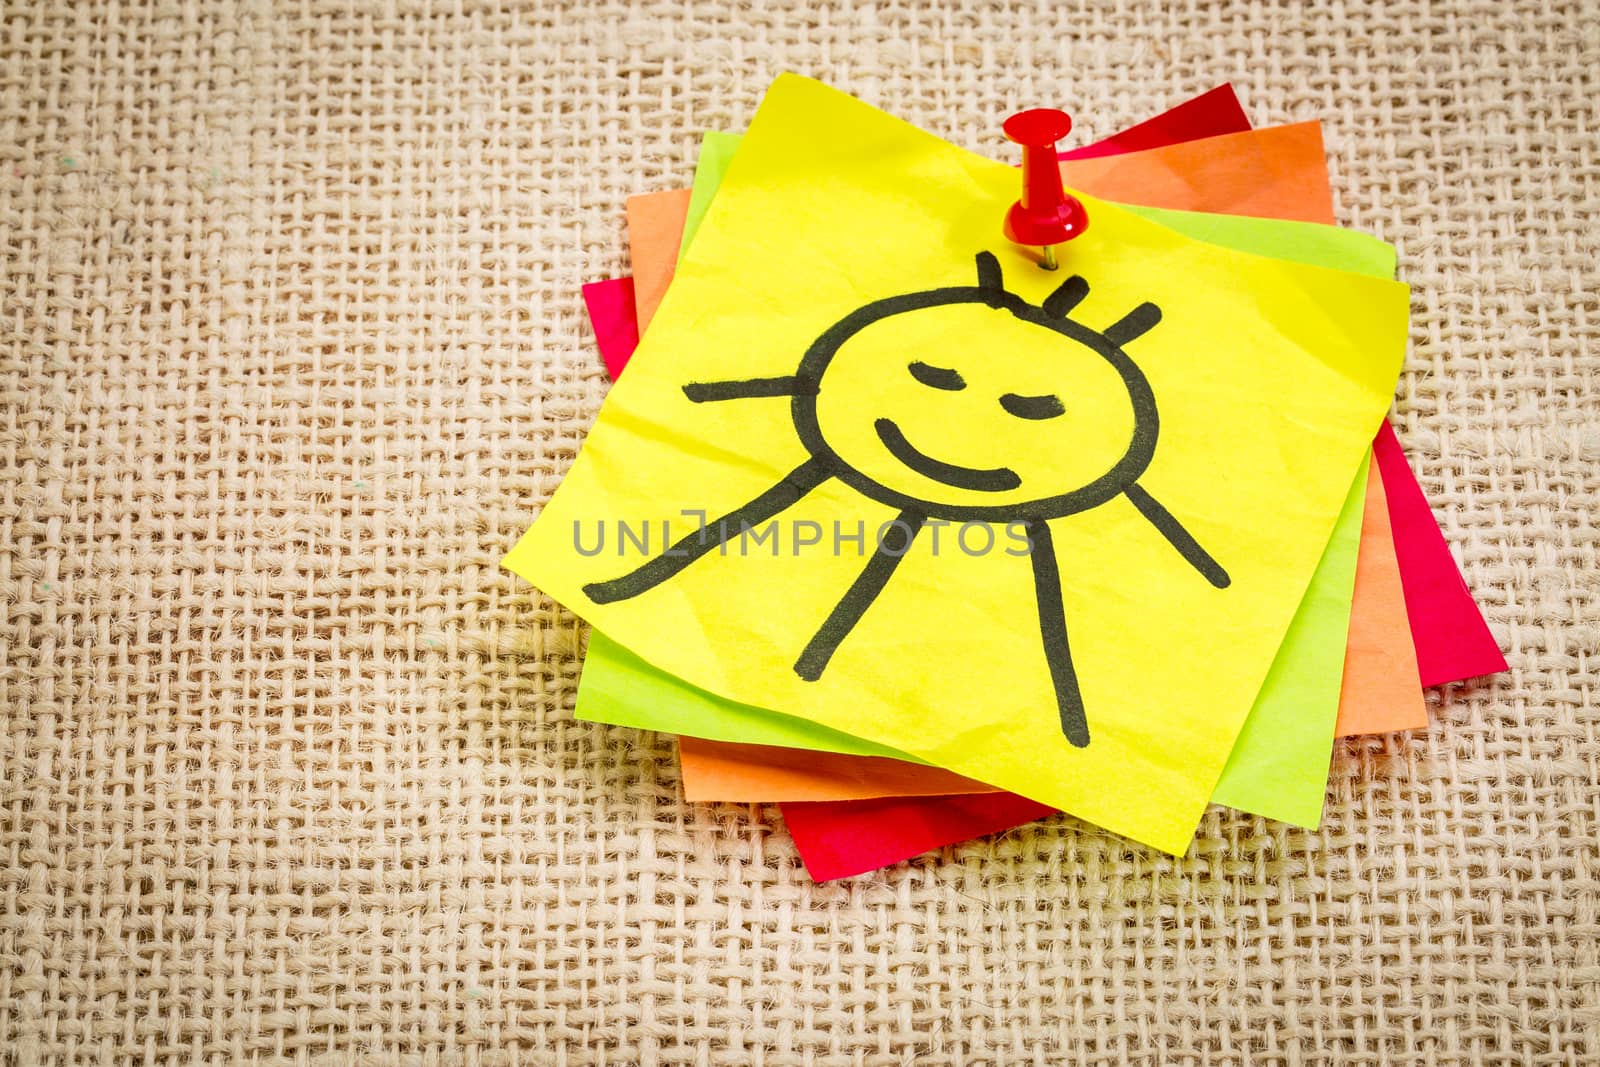 smiling sun on sticky note - reminder to smile and be positive